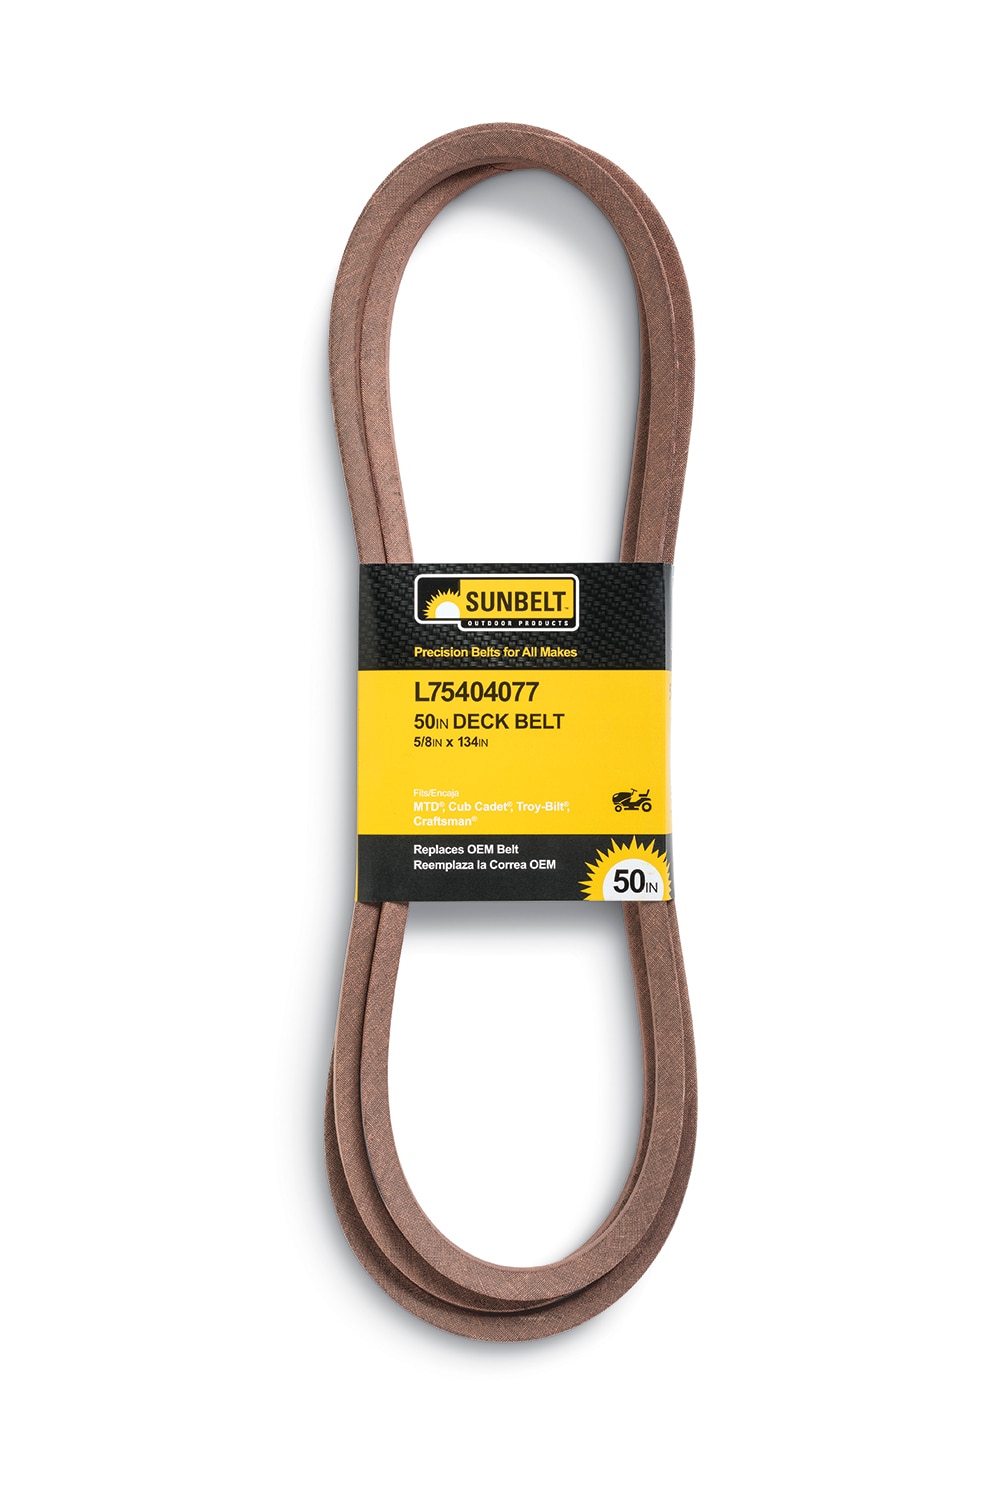 Husqvarna 42-in Deck Belt For Riding Mower/Tractors In The Lawn Mower ...